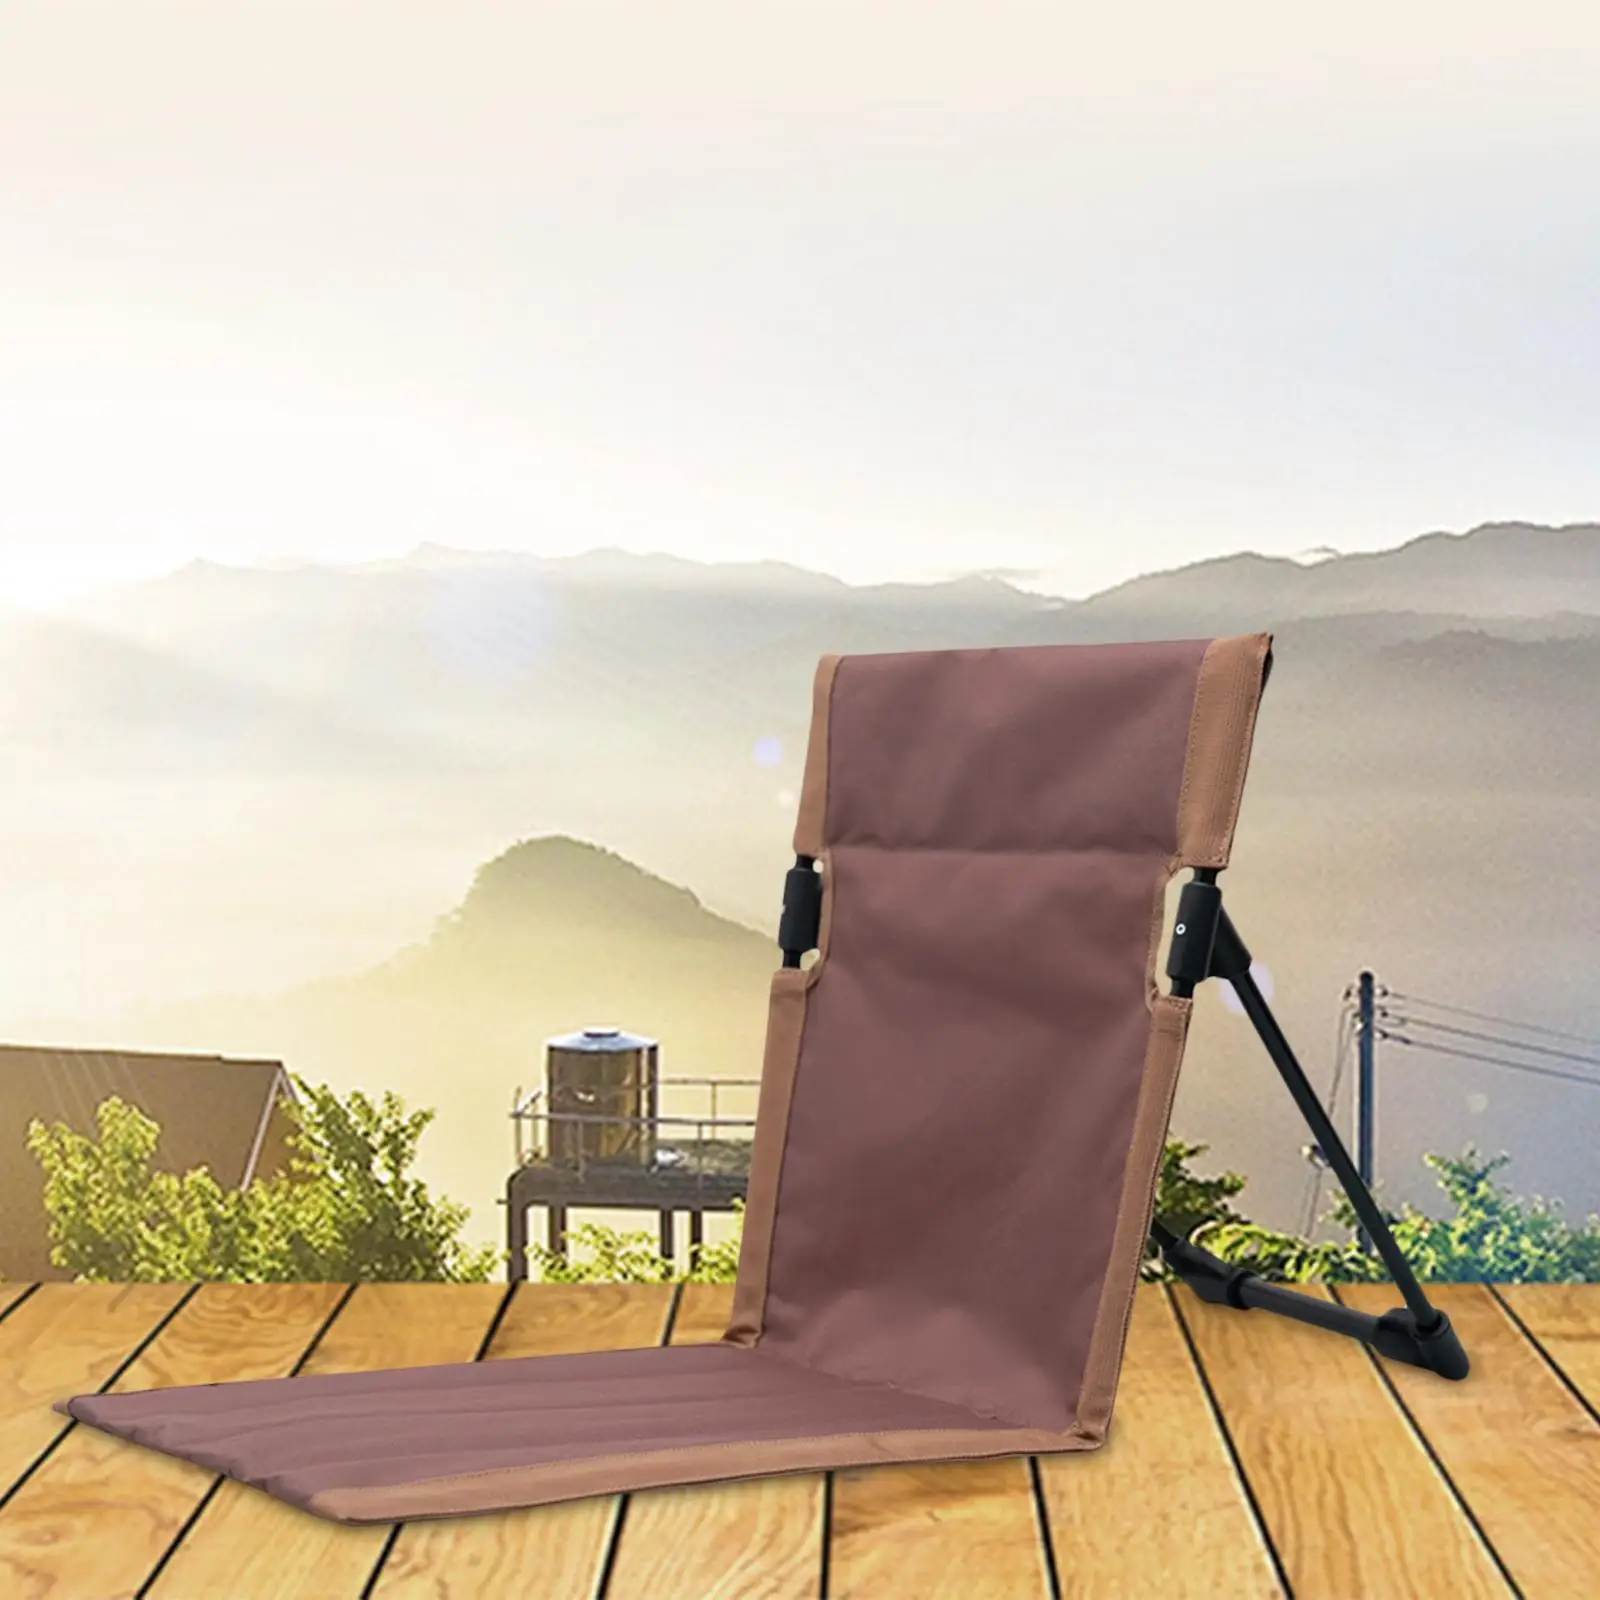 Portable Backrest Pad Camping Mat Seat Cushion Oxford Stadium Chair Foldable for Park Music Concerts Backpacking Hiking Trekking